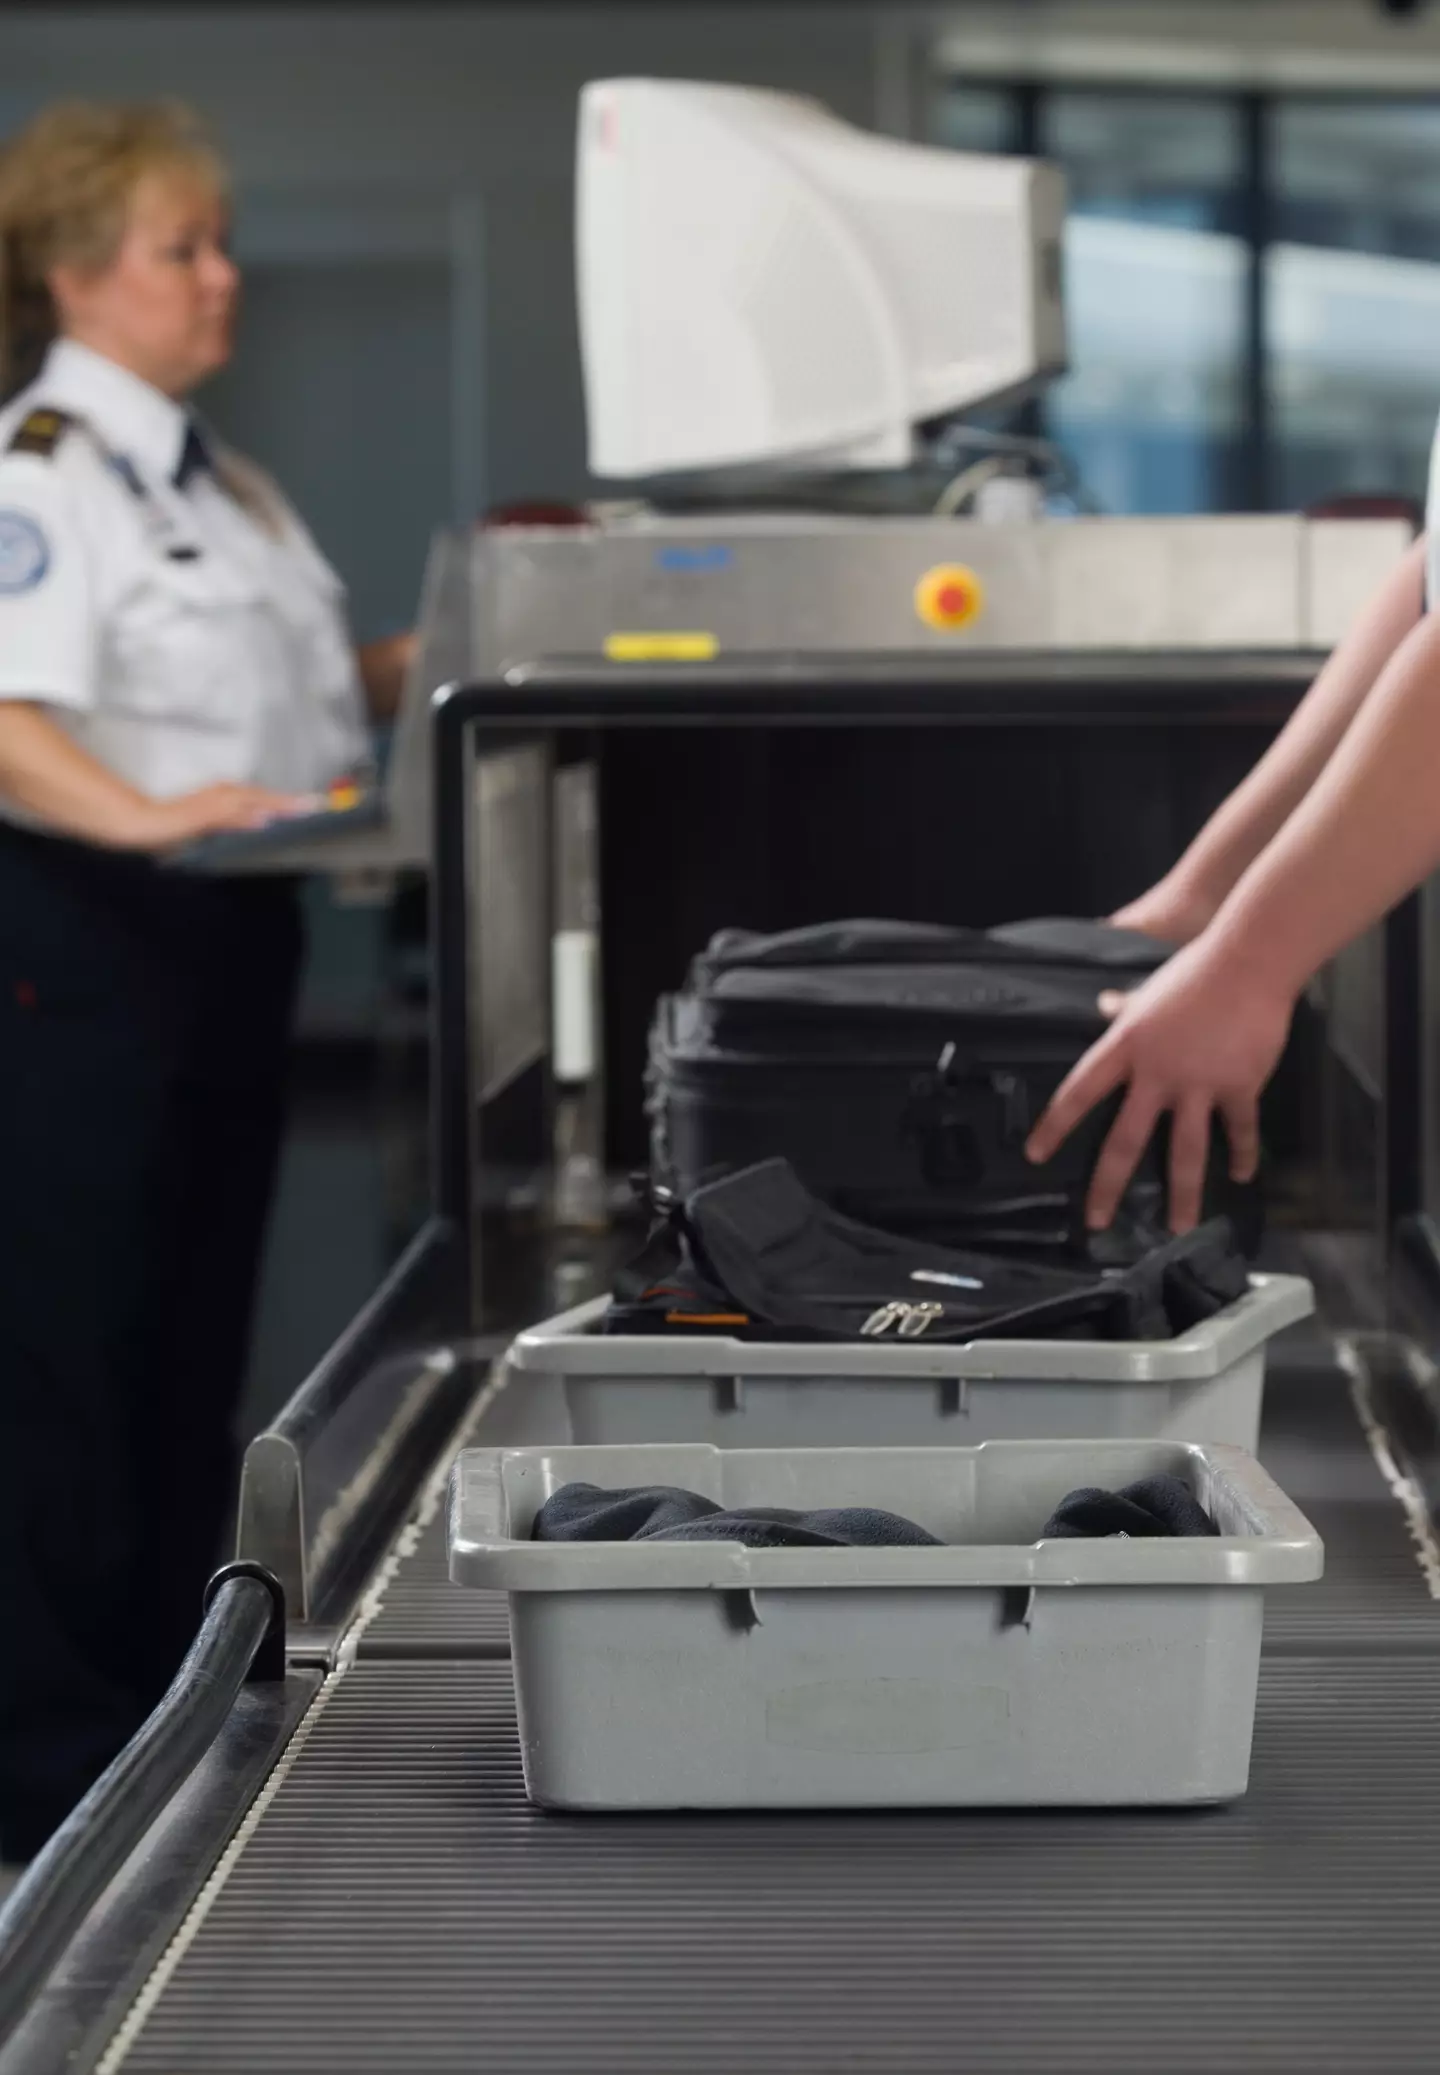 New airport security scanners are slowly being rolled out across the UK (Getty Stock Images)